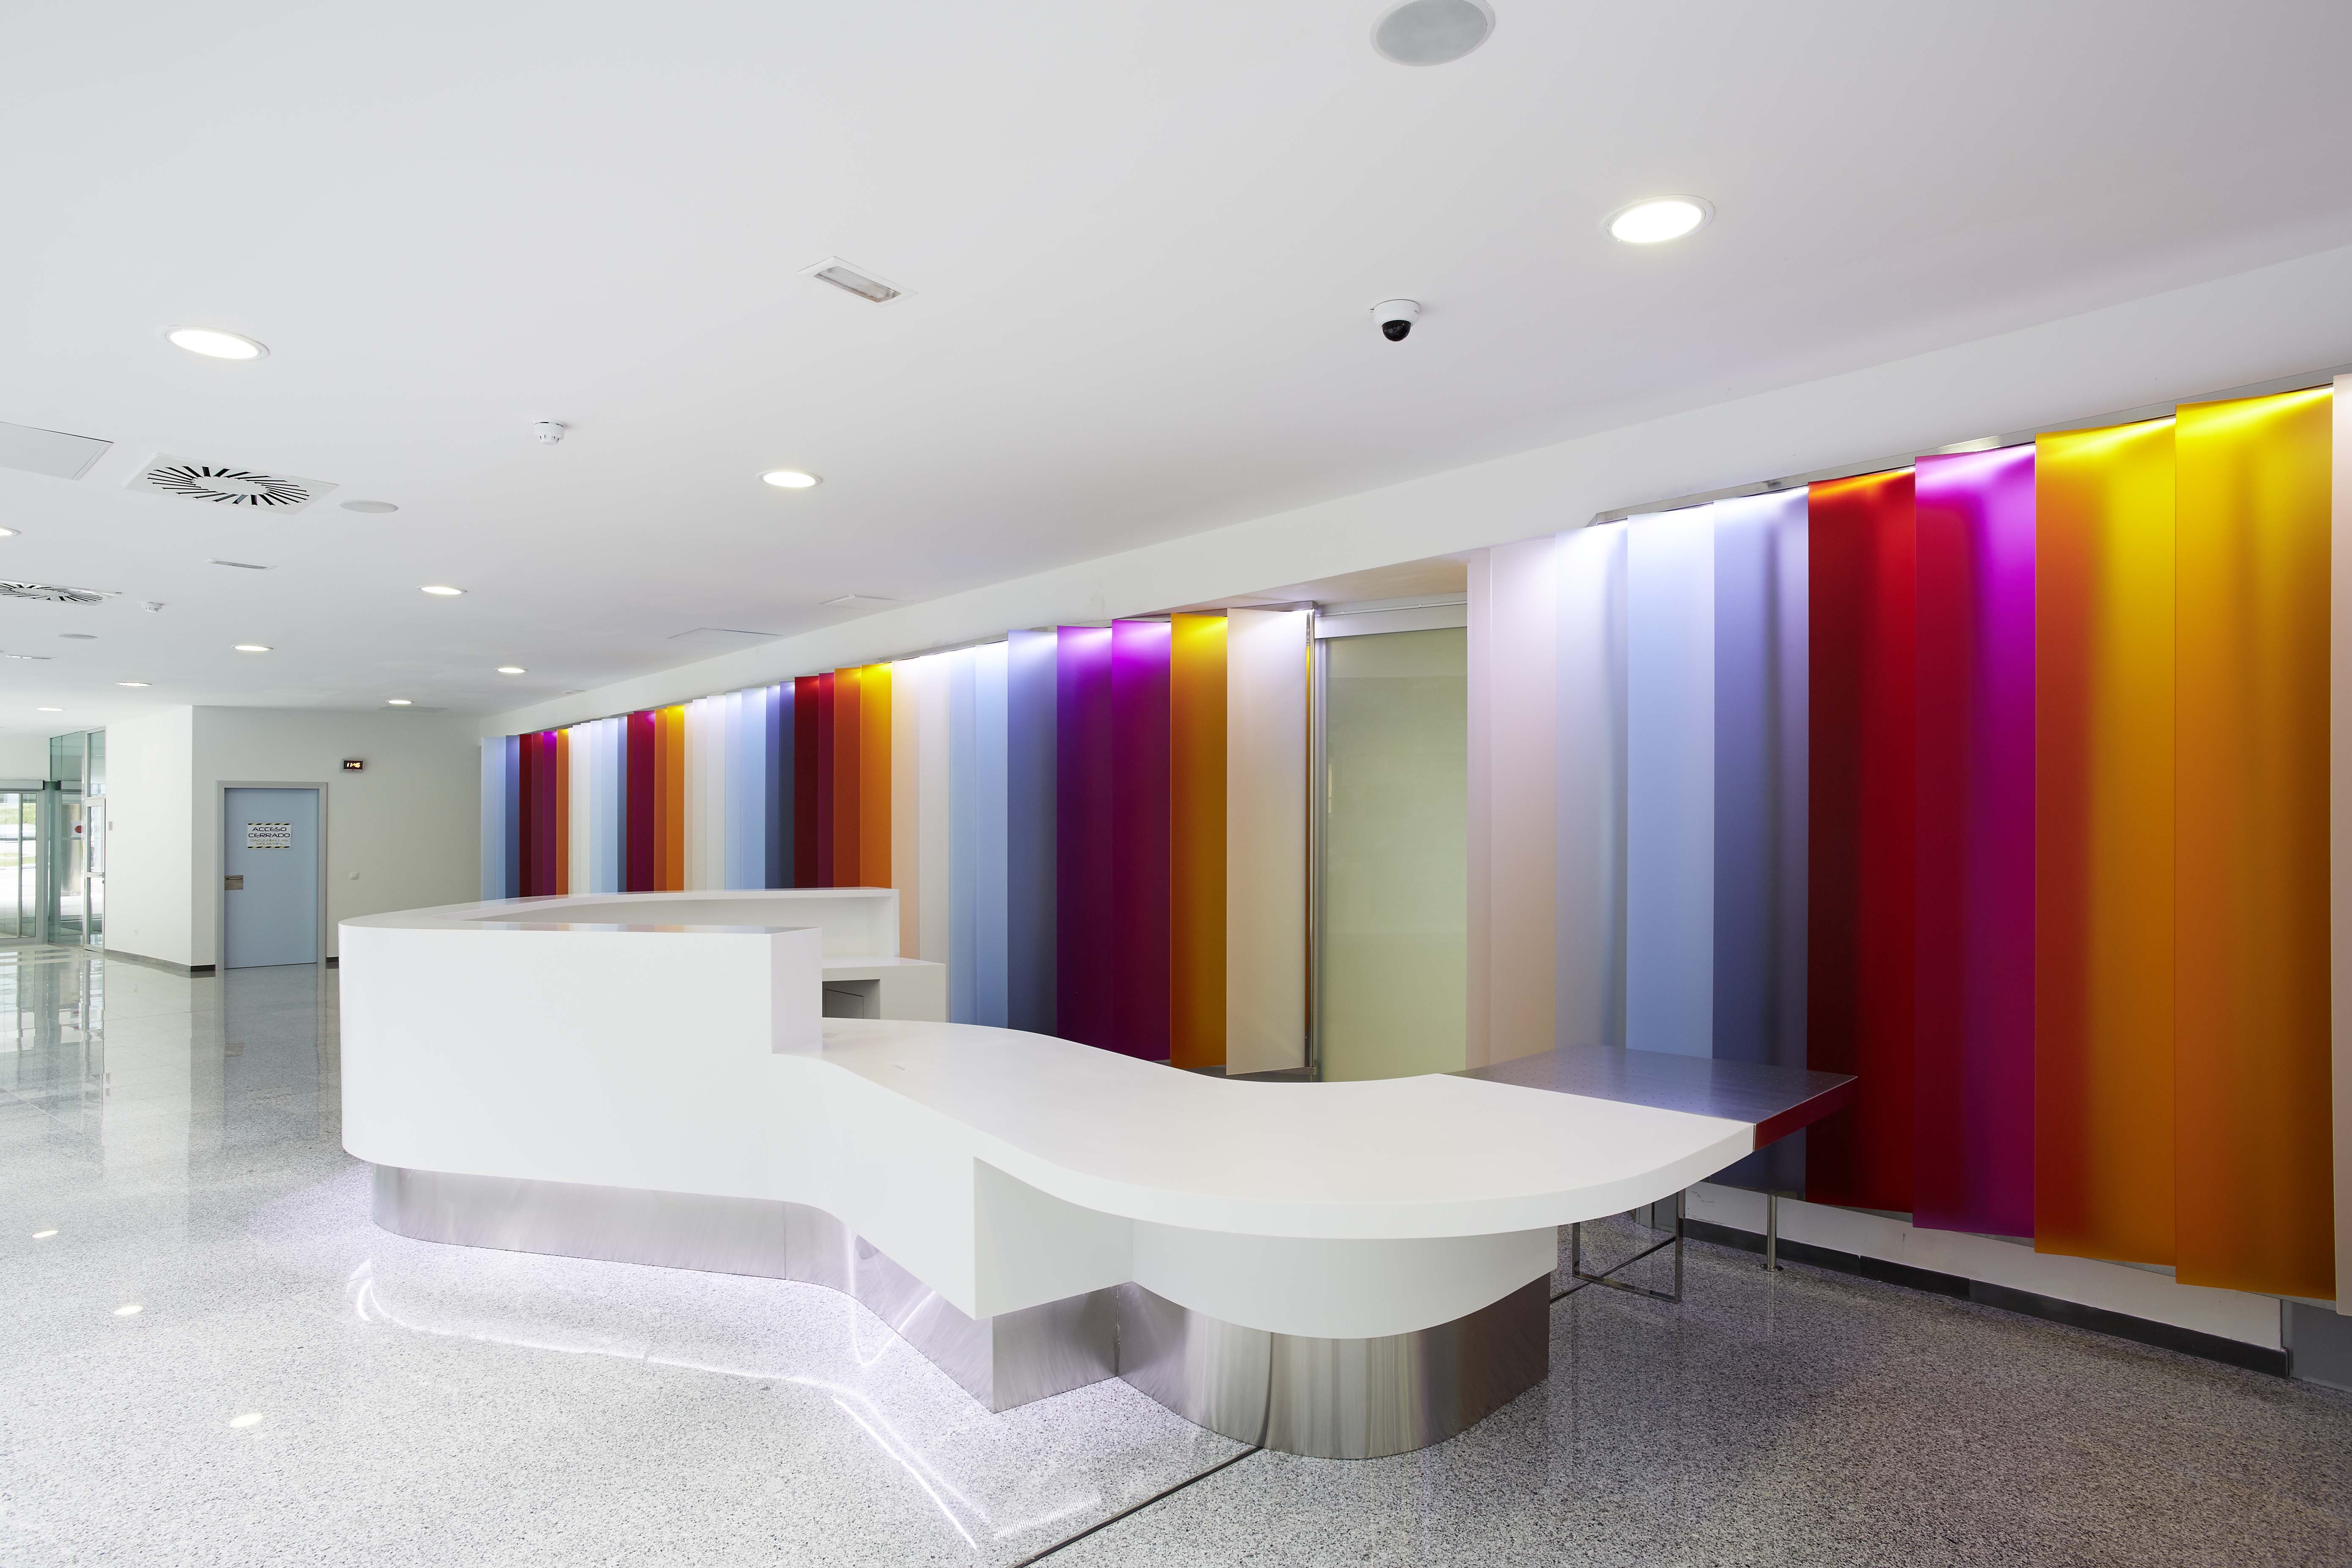 Surfacing Materials From Dupont Corian Installed In New Hospital